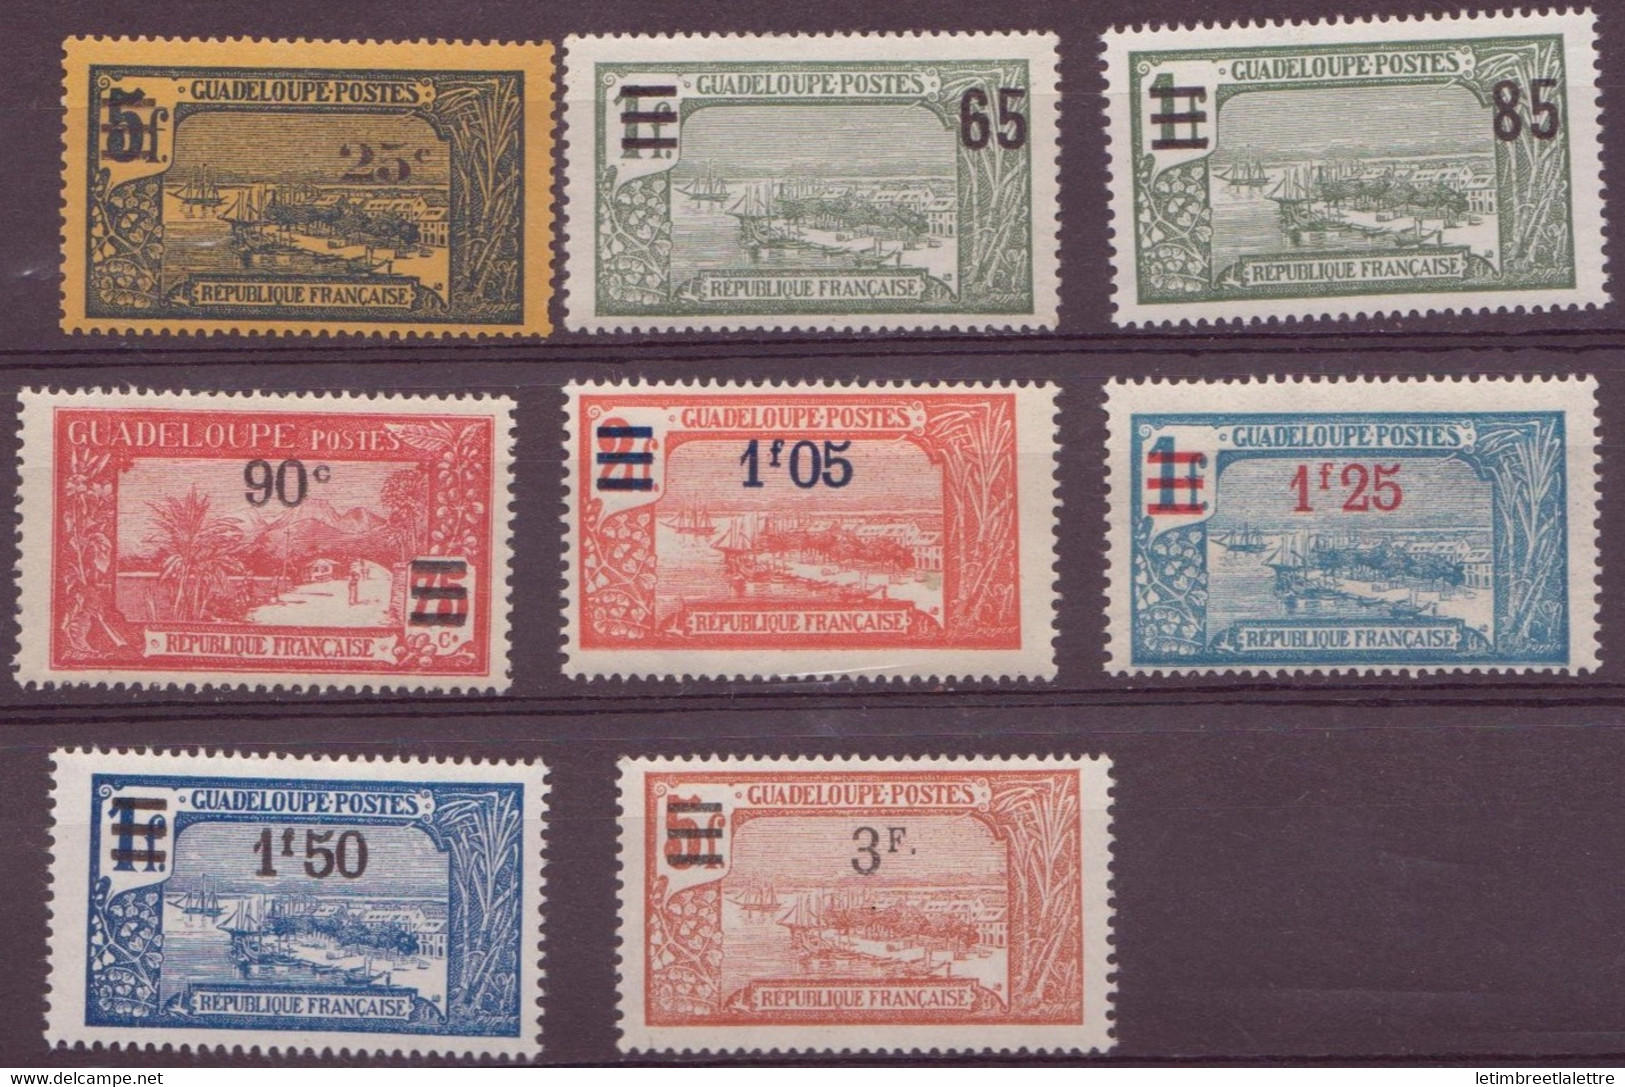 ⭐ Guadeloupe - YT N° 89 à 96 ** - Neuf Sans Charnière - 1924 / 1927 ⭐ - Unused Stamps